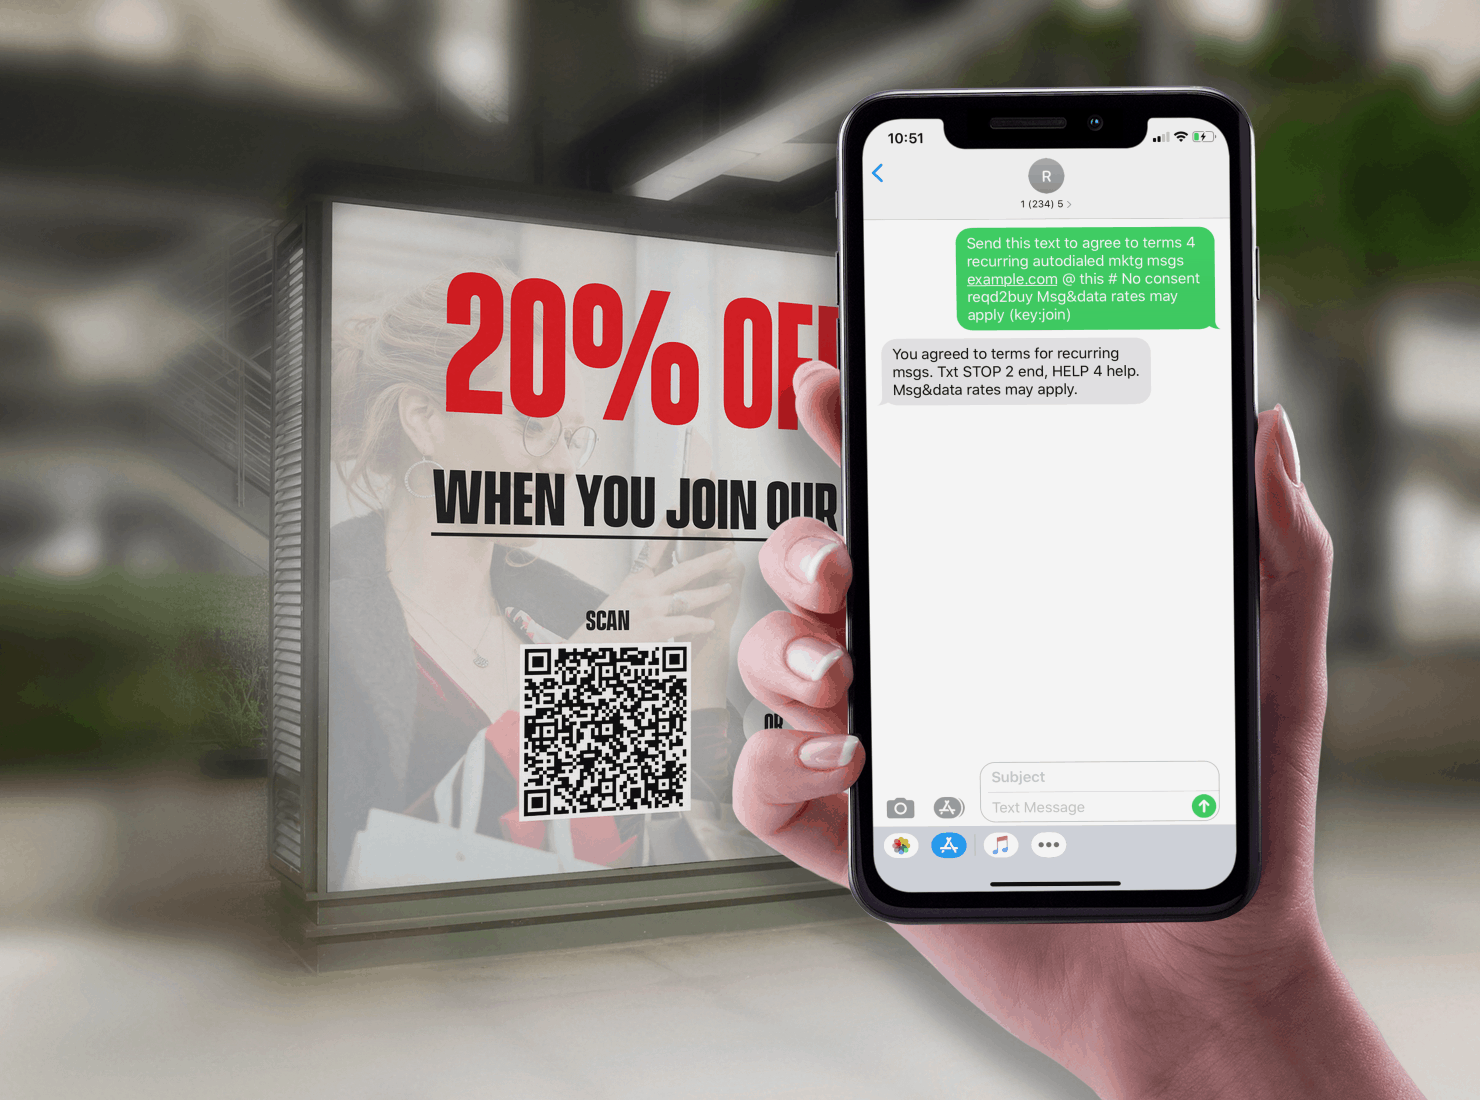 SMS Marketing with QR Codes - Step 6 Opt-In Confirmation Message